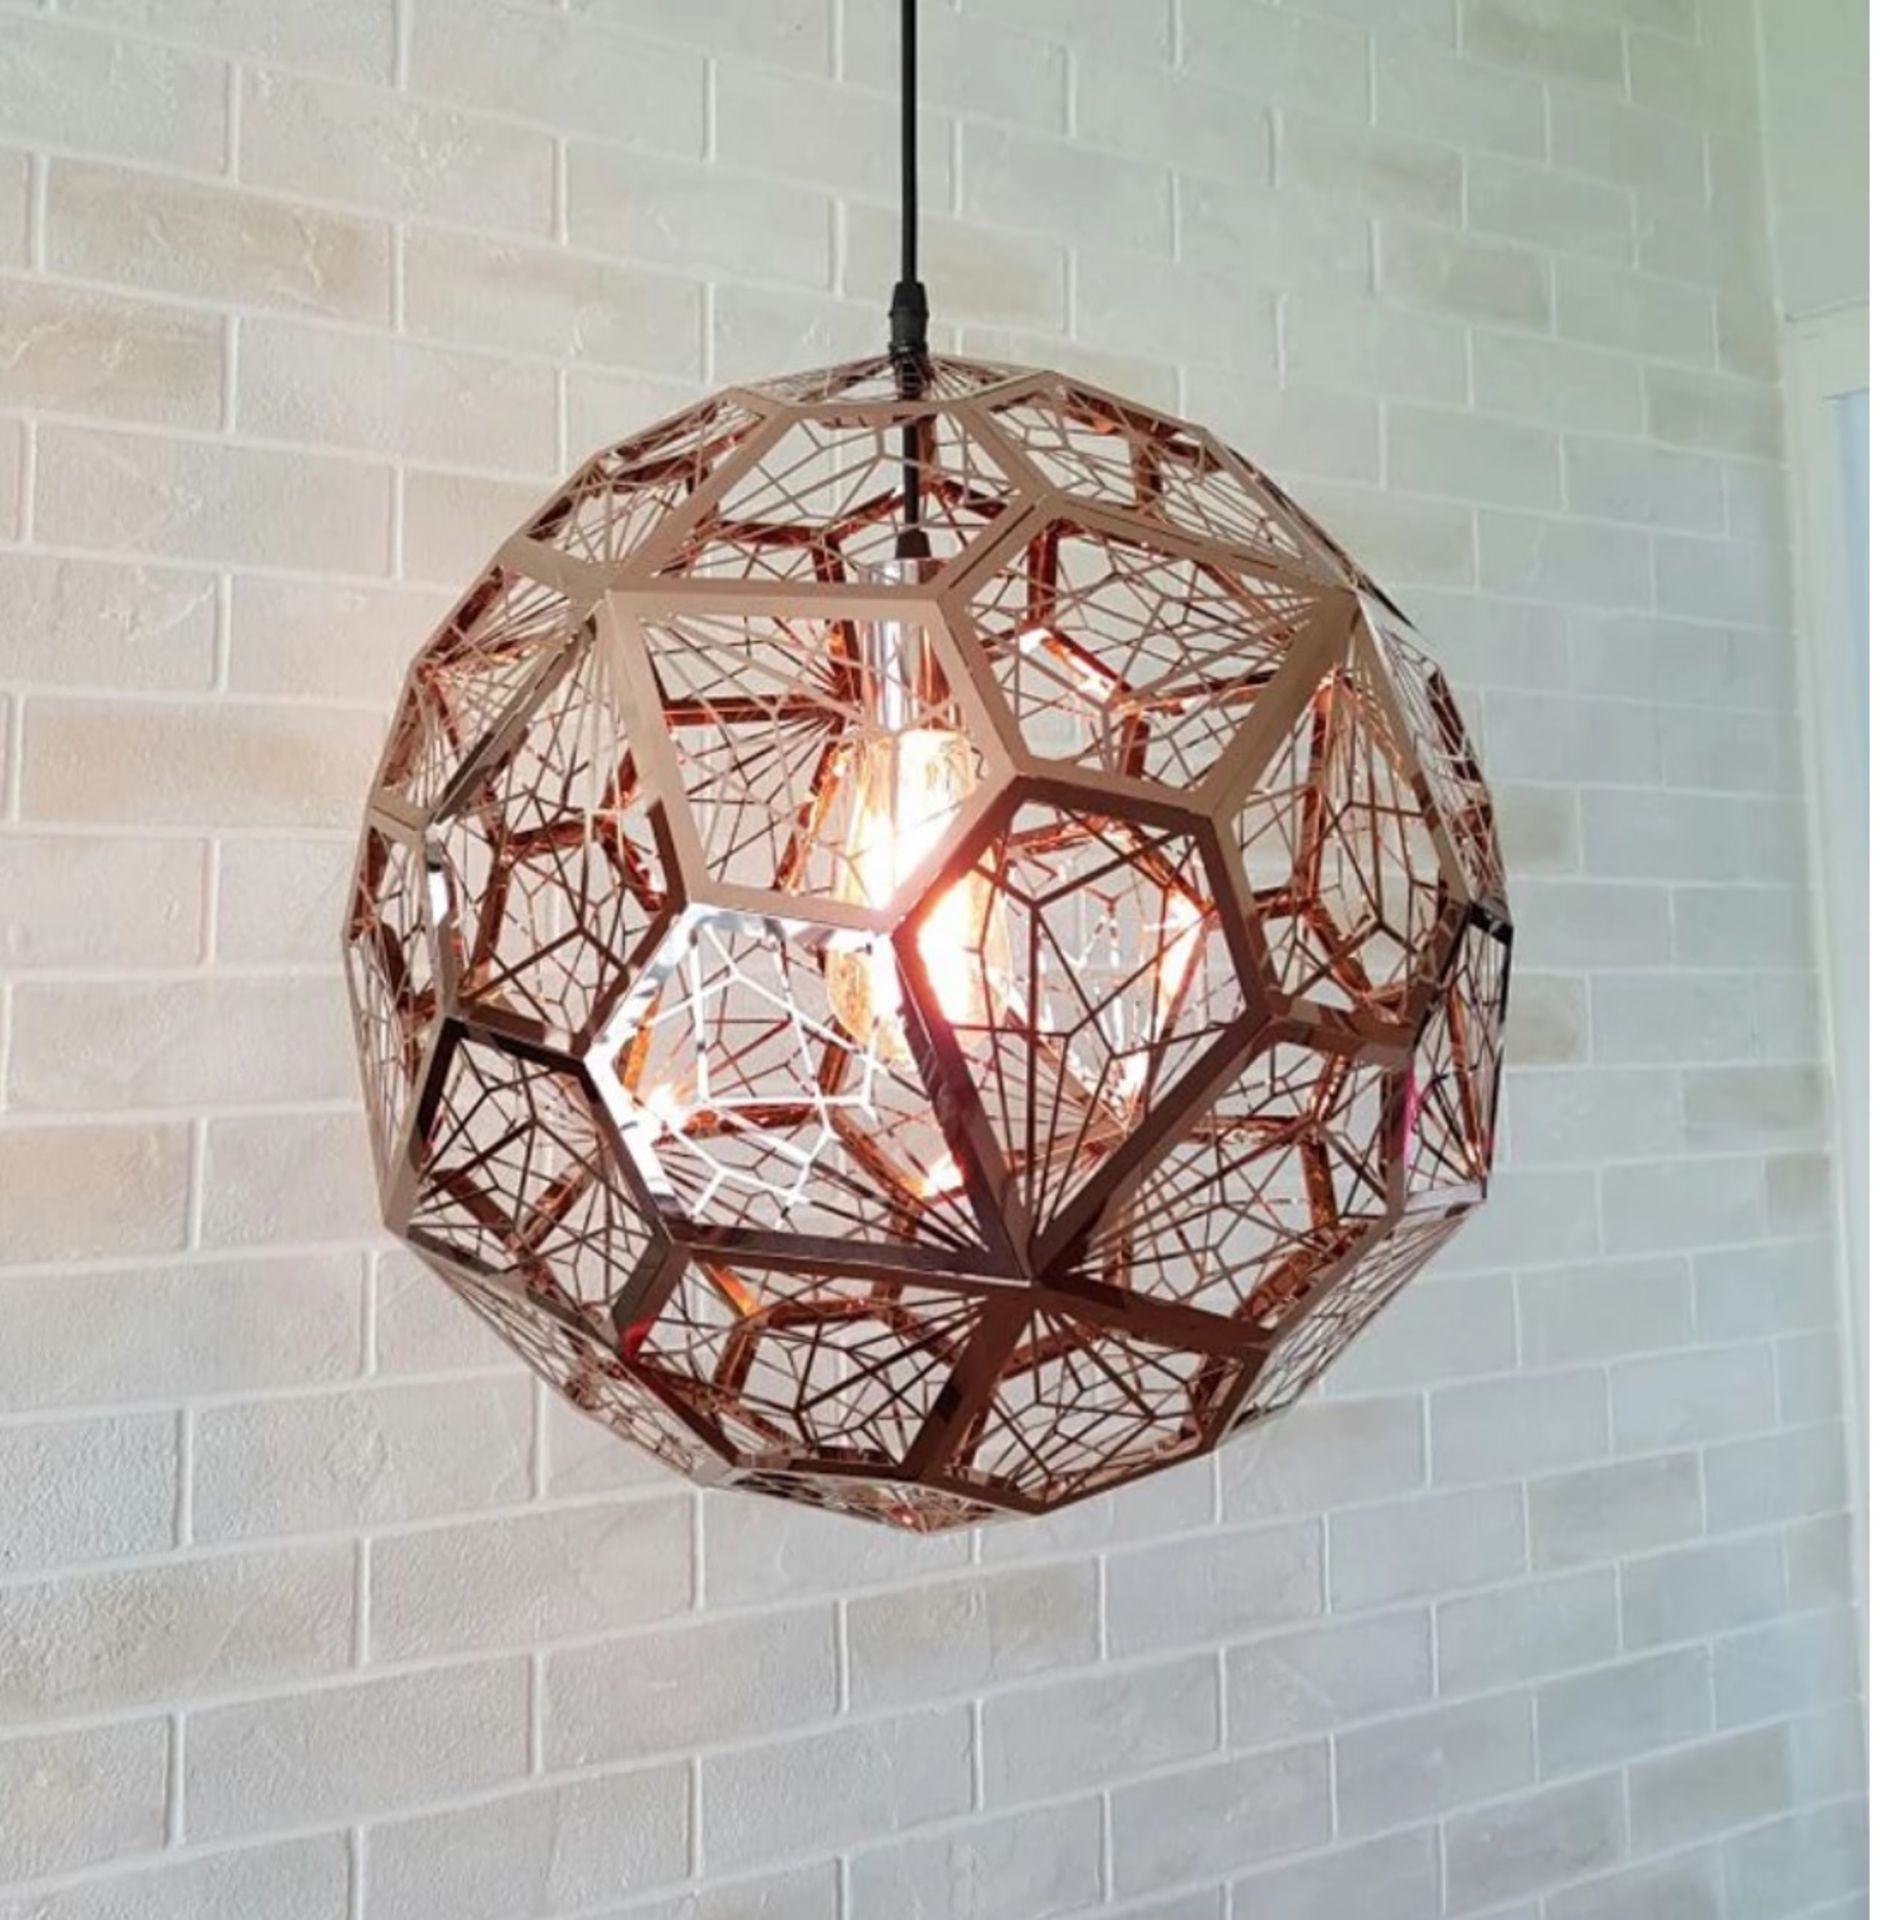 Rango 48cm Silver Pendant Light Inspired by the logic of mathematics, the shade is composed of